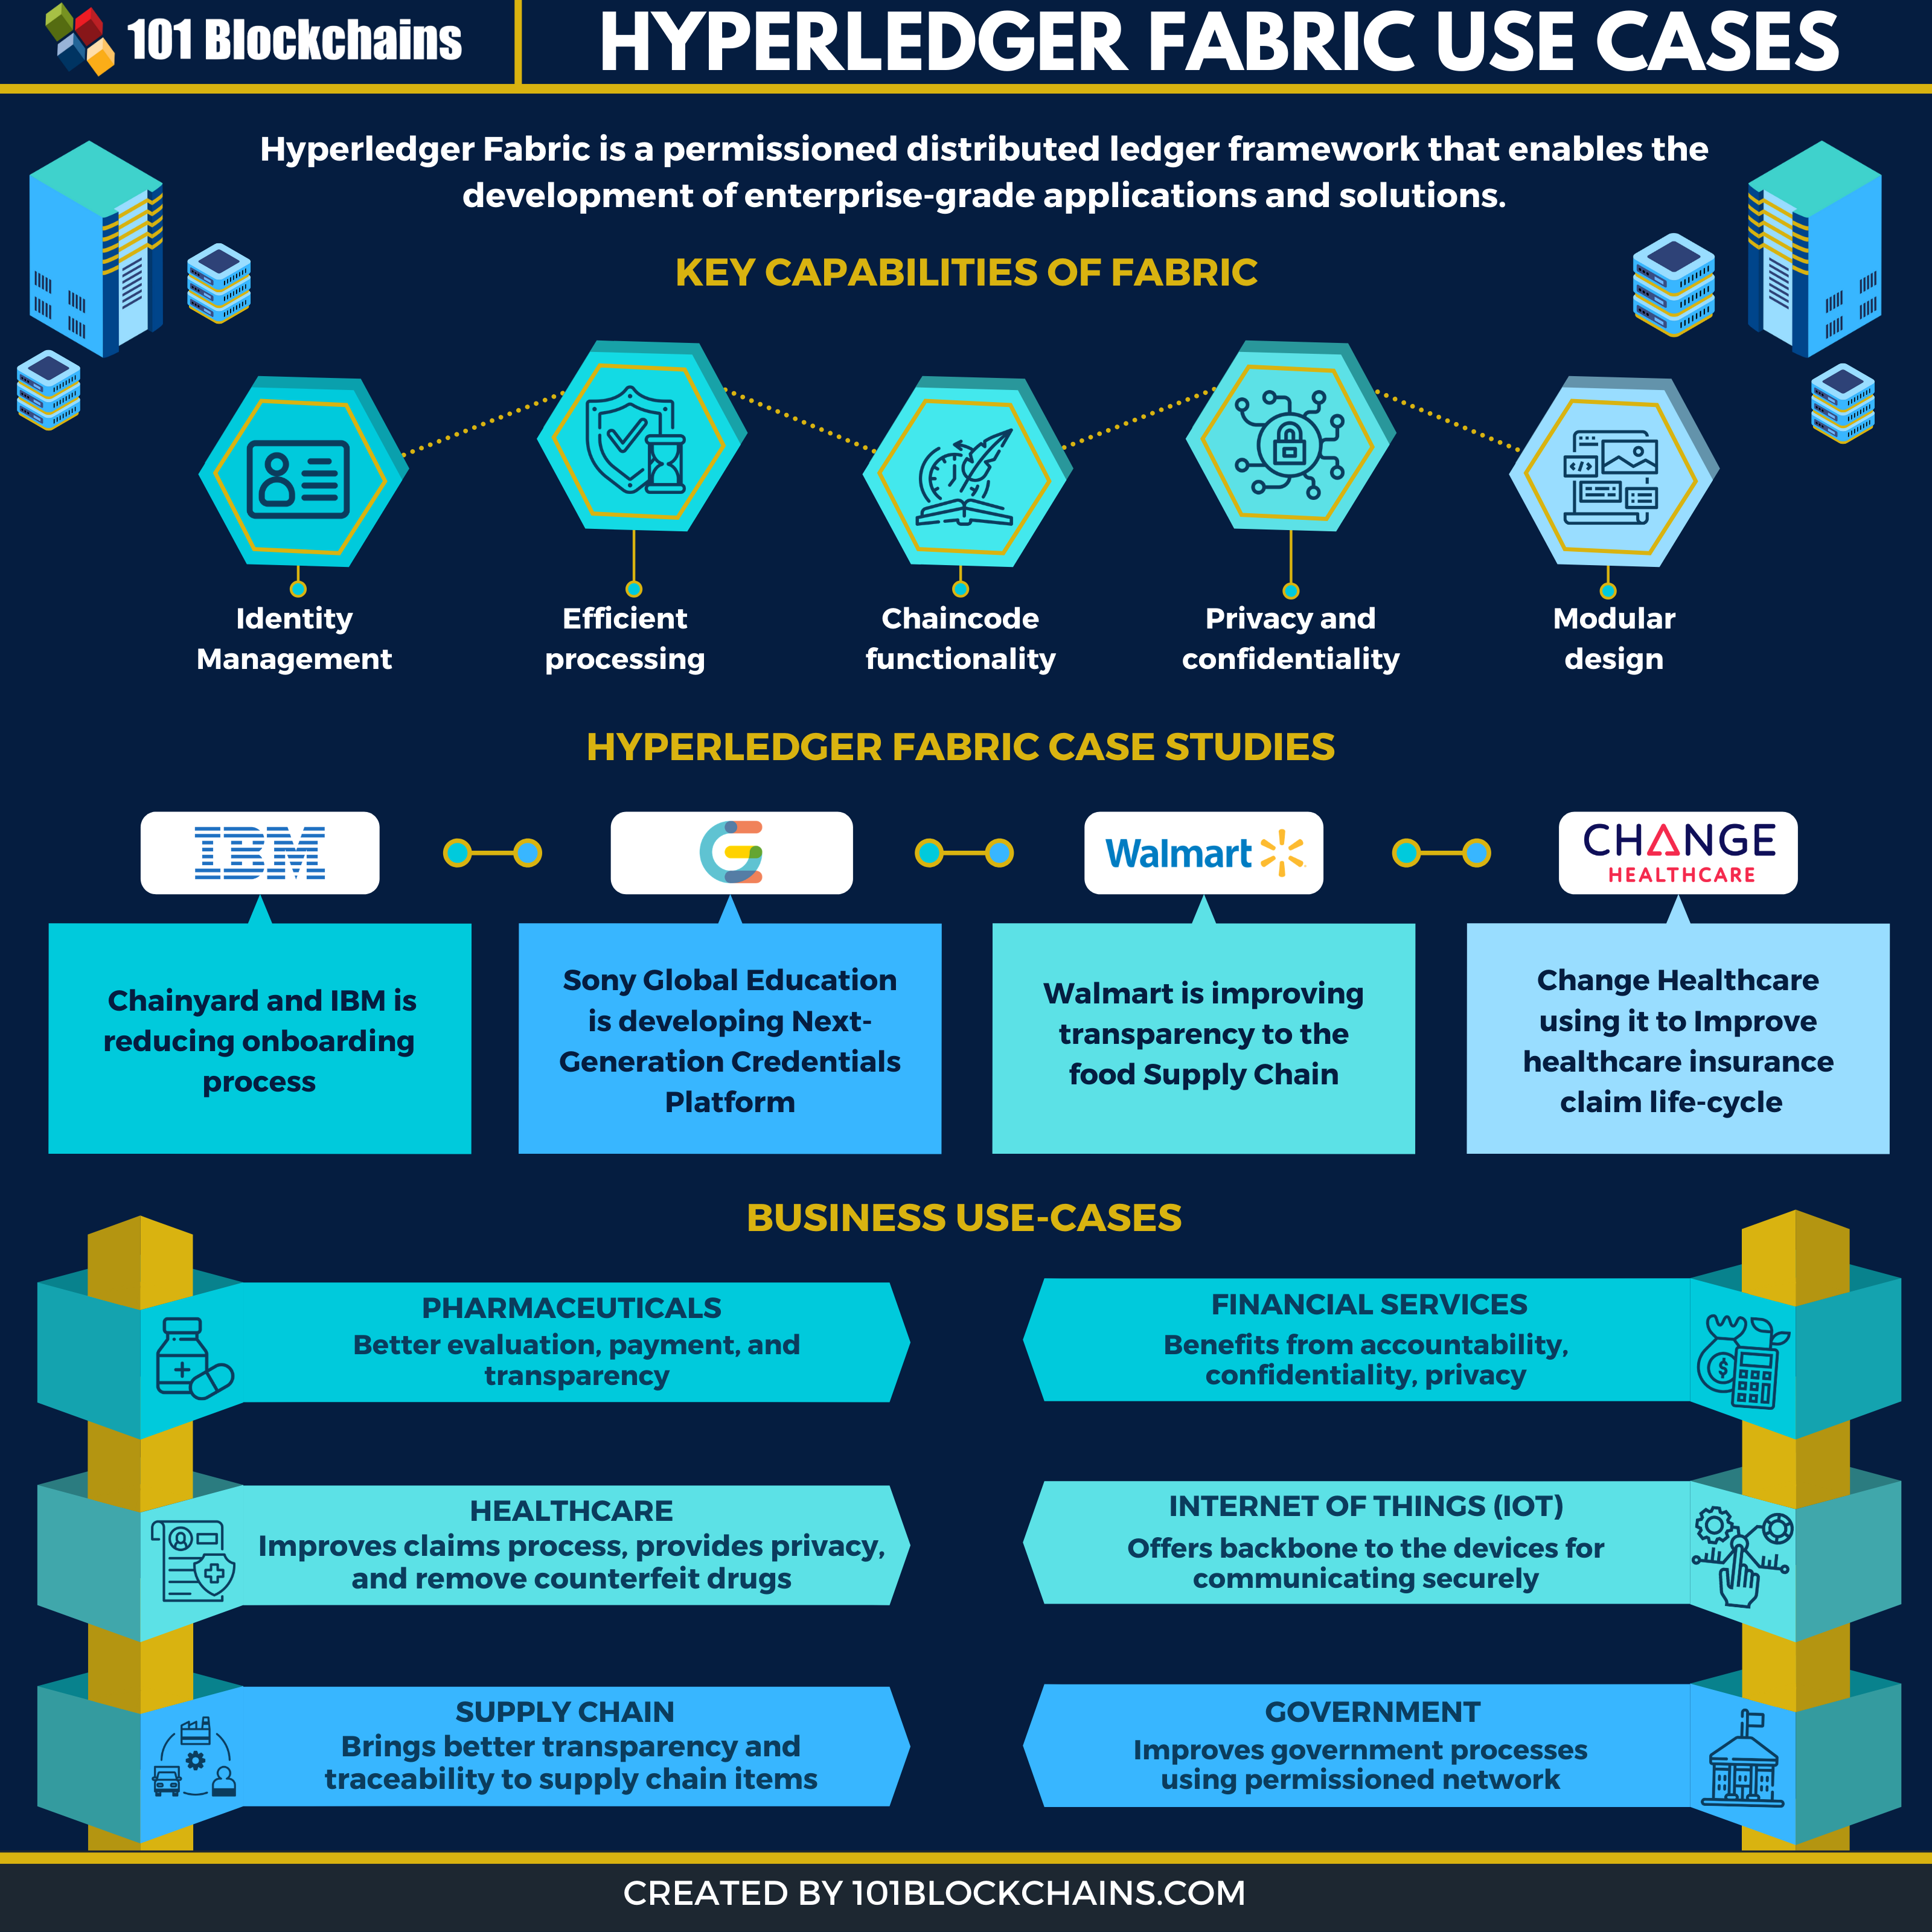 Hyperledger Fabric Use Cases